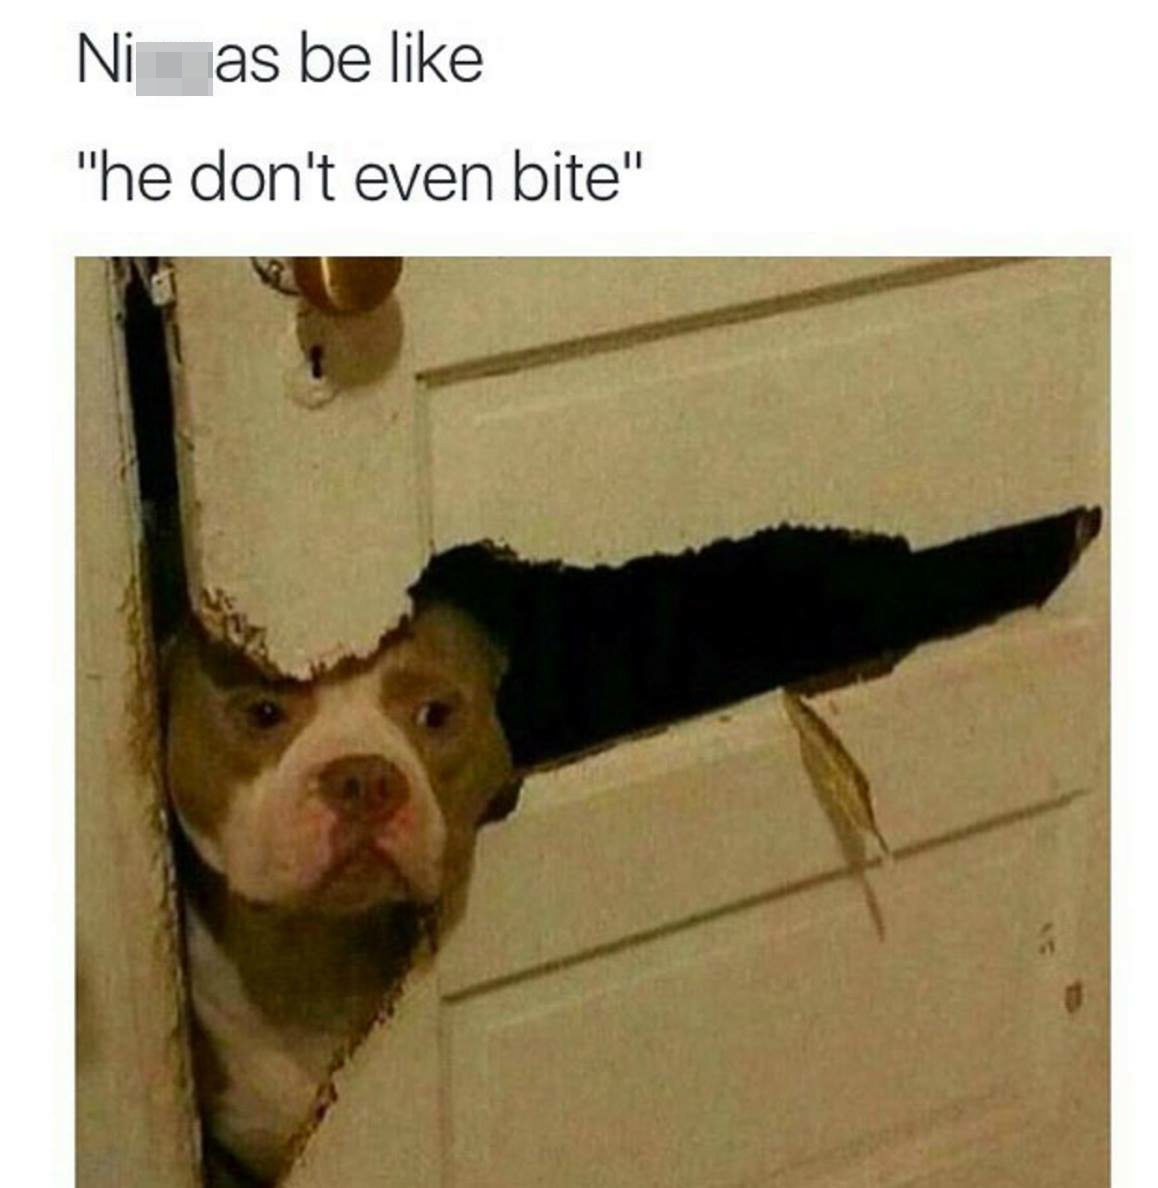 nigas be like - Nias be "he don't even bite"